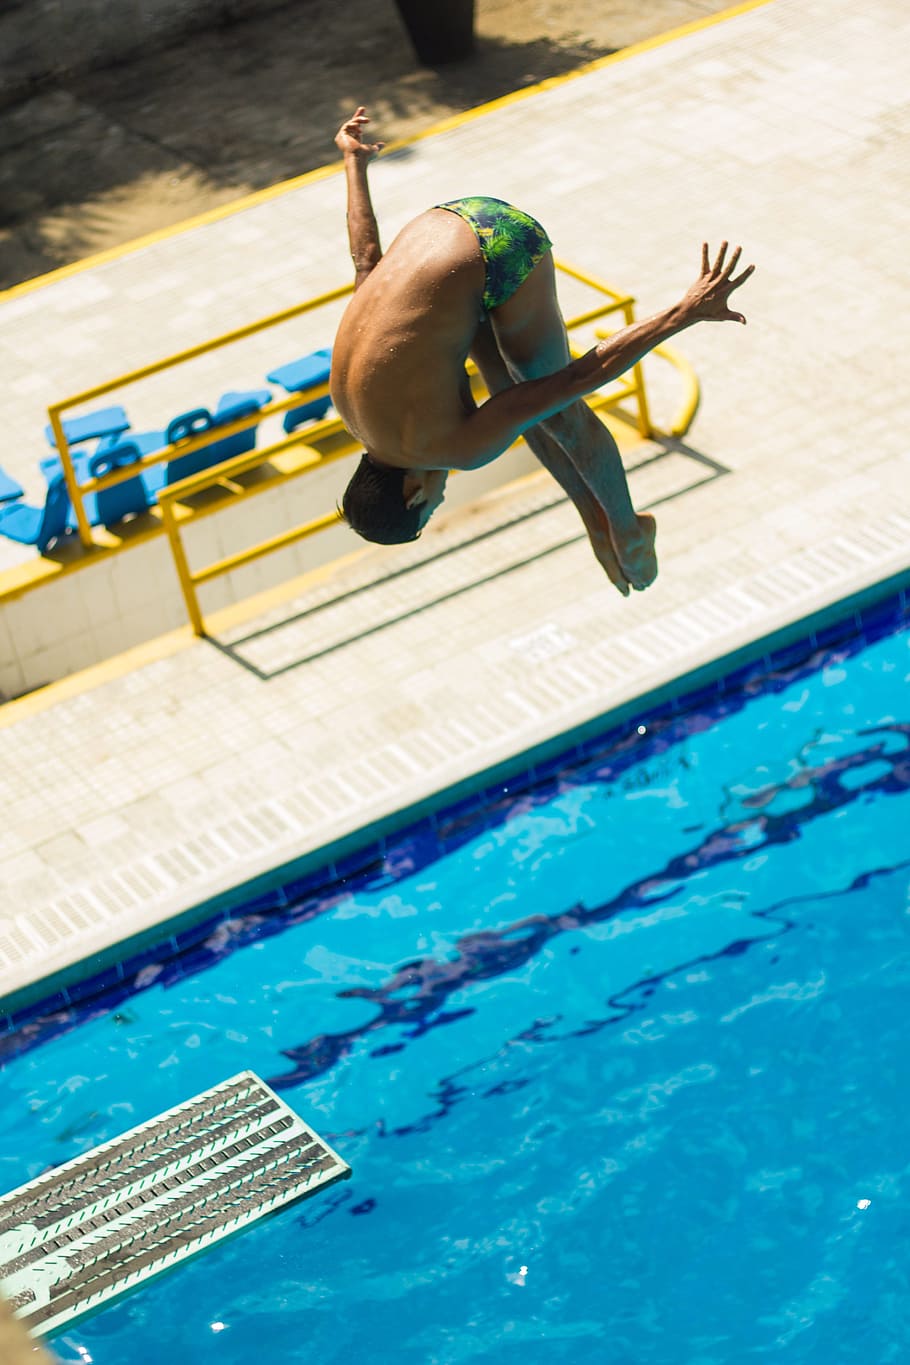 swimming, pool, pool signs, swimmer, swimming pool, jumping, leisure activity, water, full length, diving